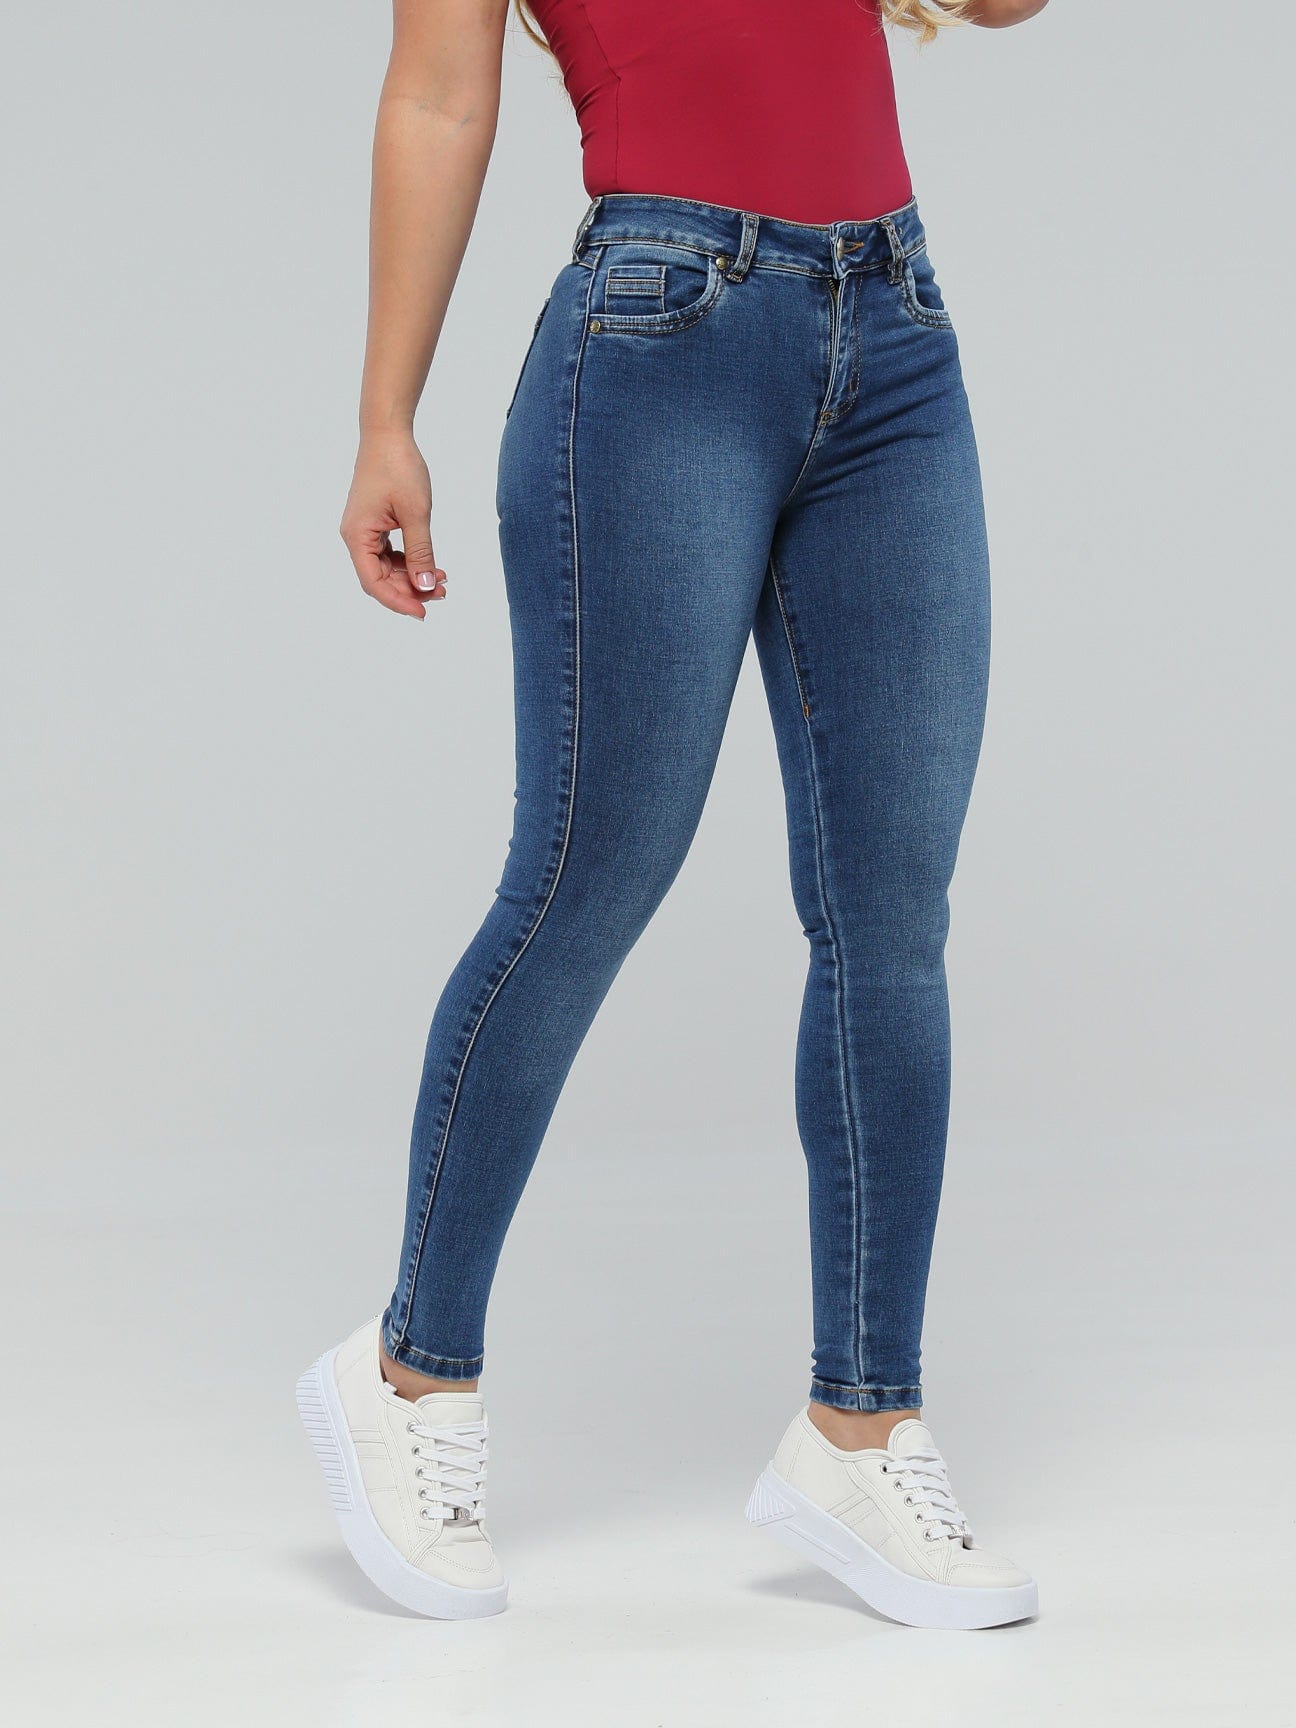 Colombian Jeans | Butt Lift Jeans | Jeans Colombianos – Page – Colombiana